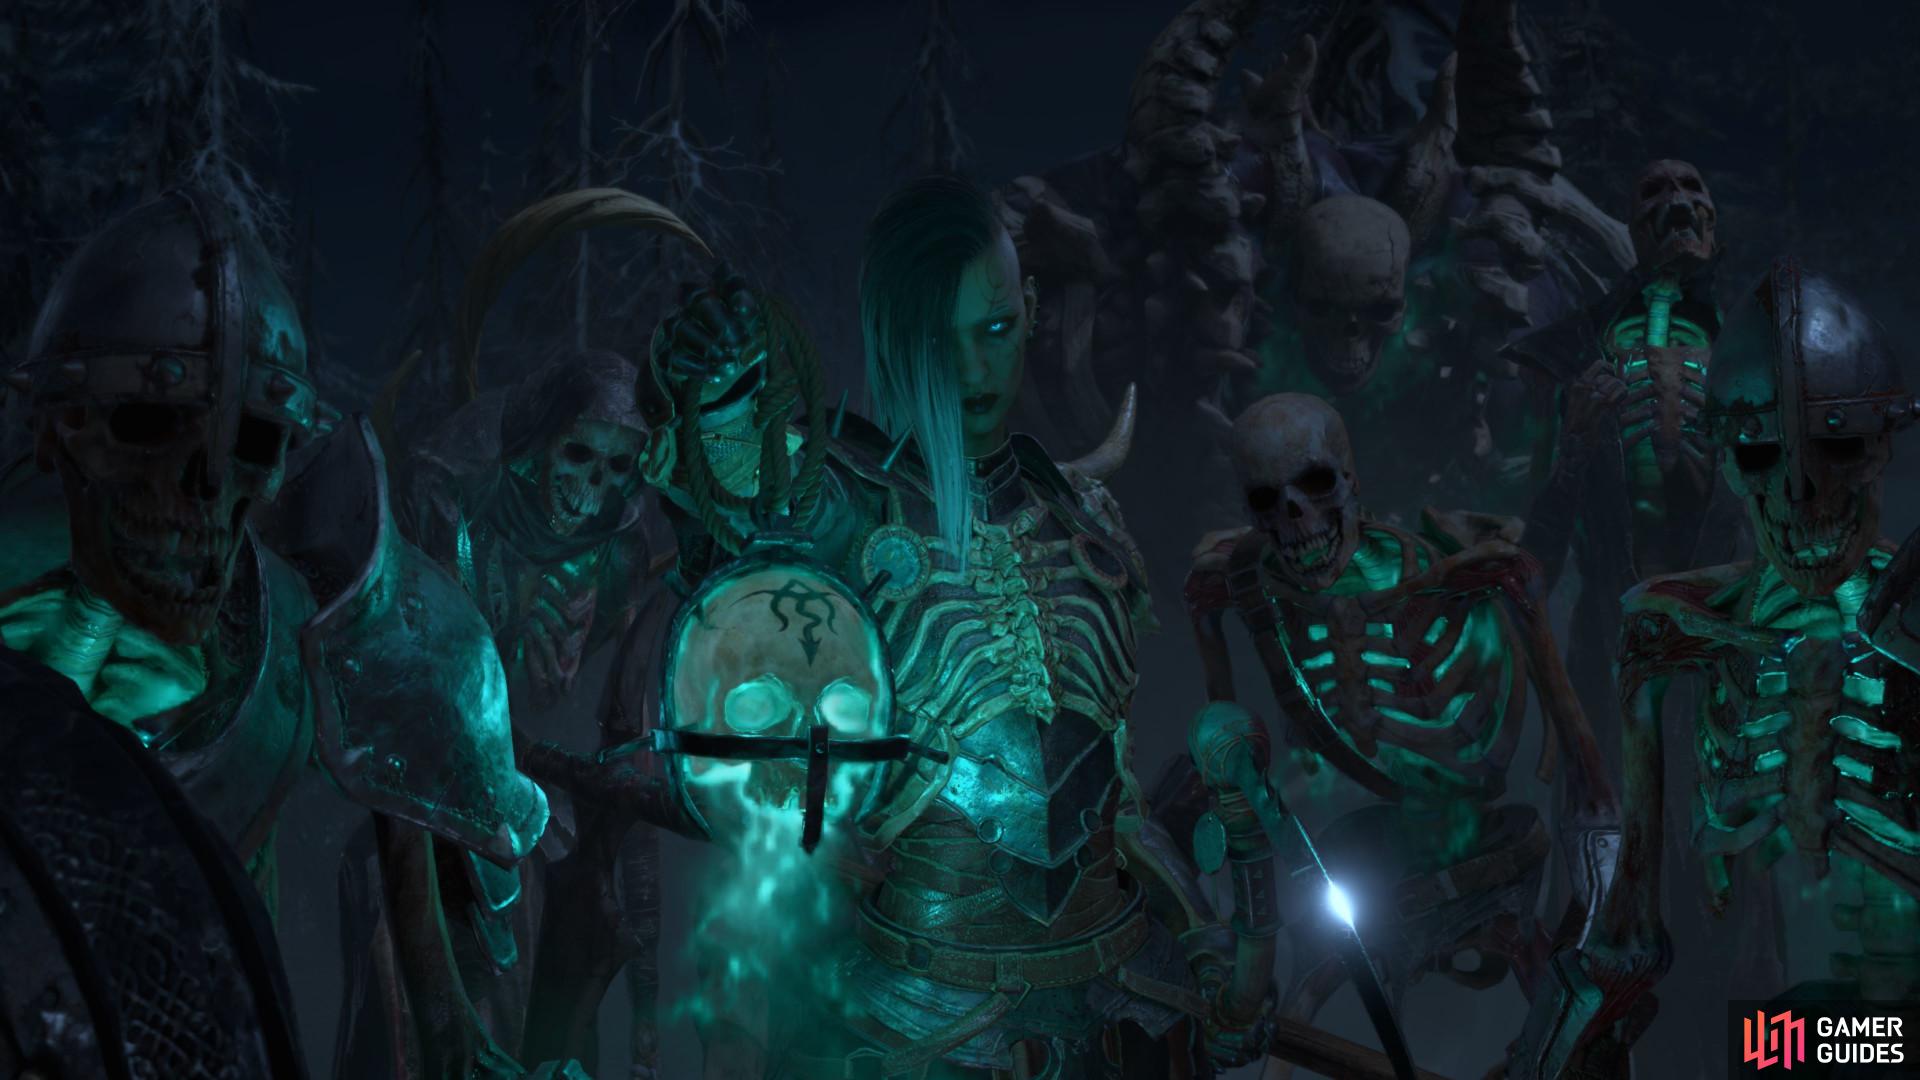 The Necromancer returns with its love of summons and with forbidden magic types. Image via Blizzard Entertainment.